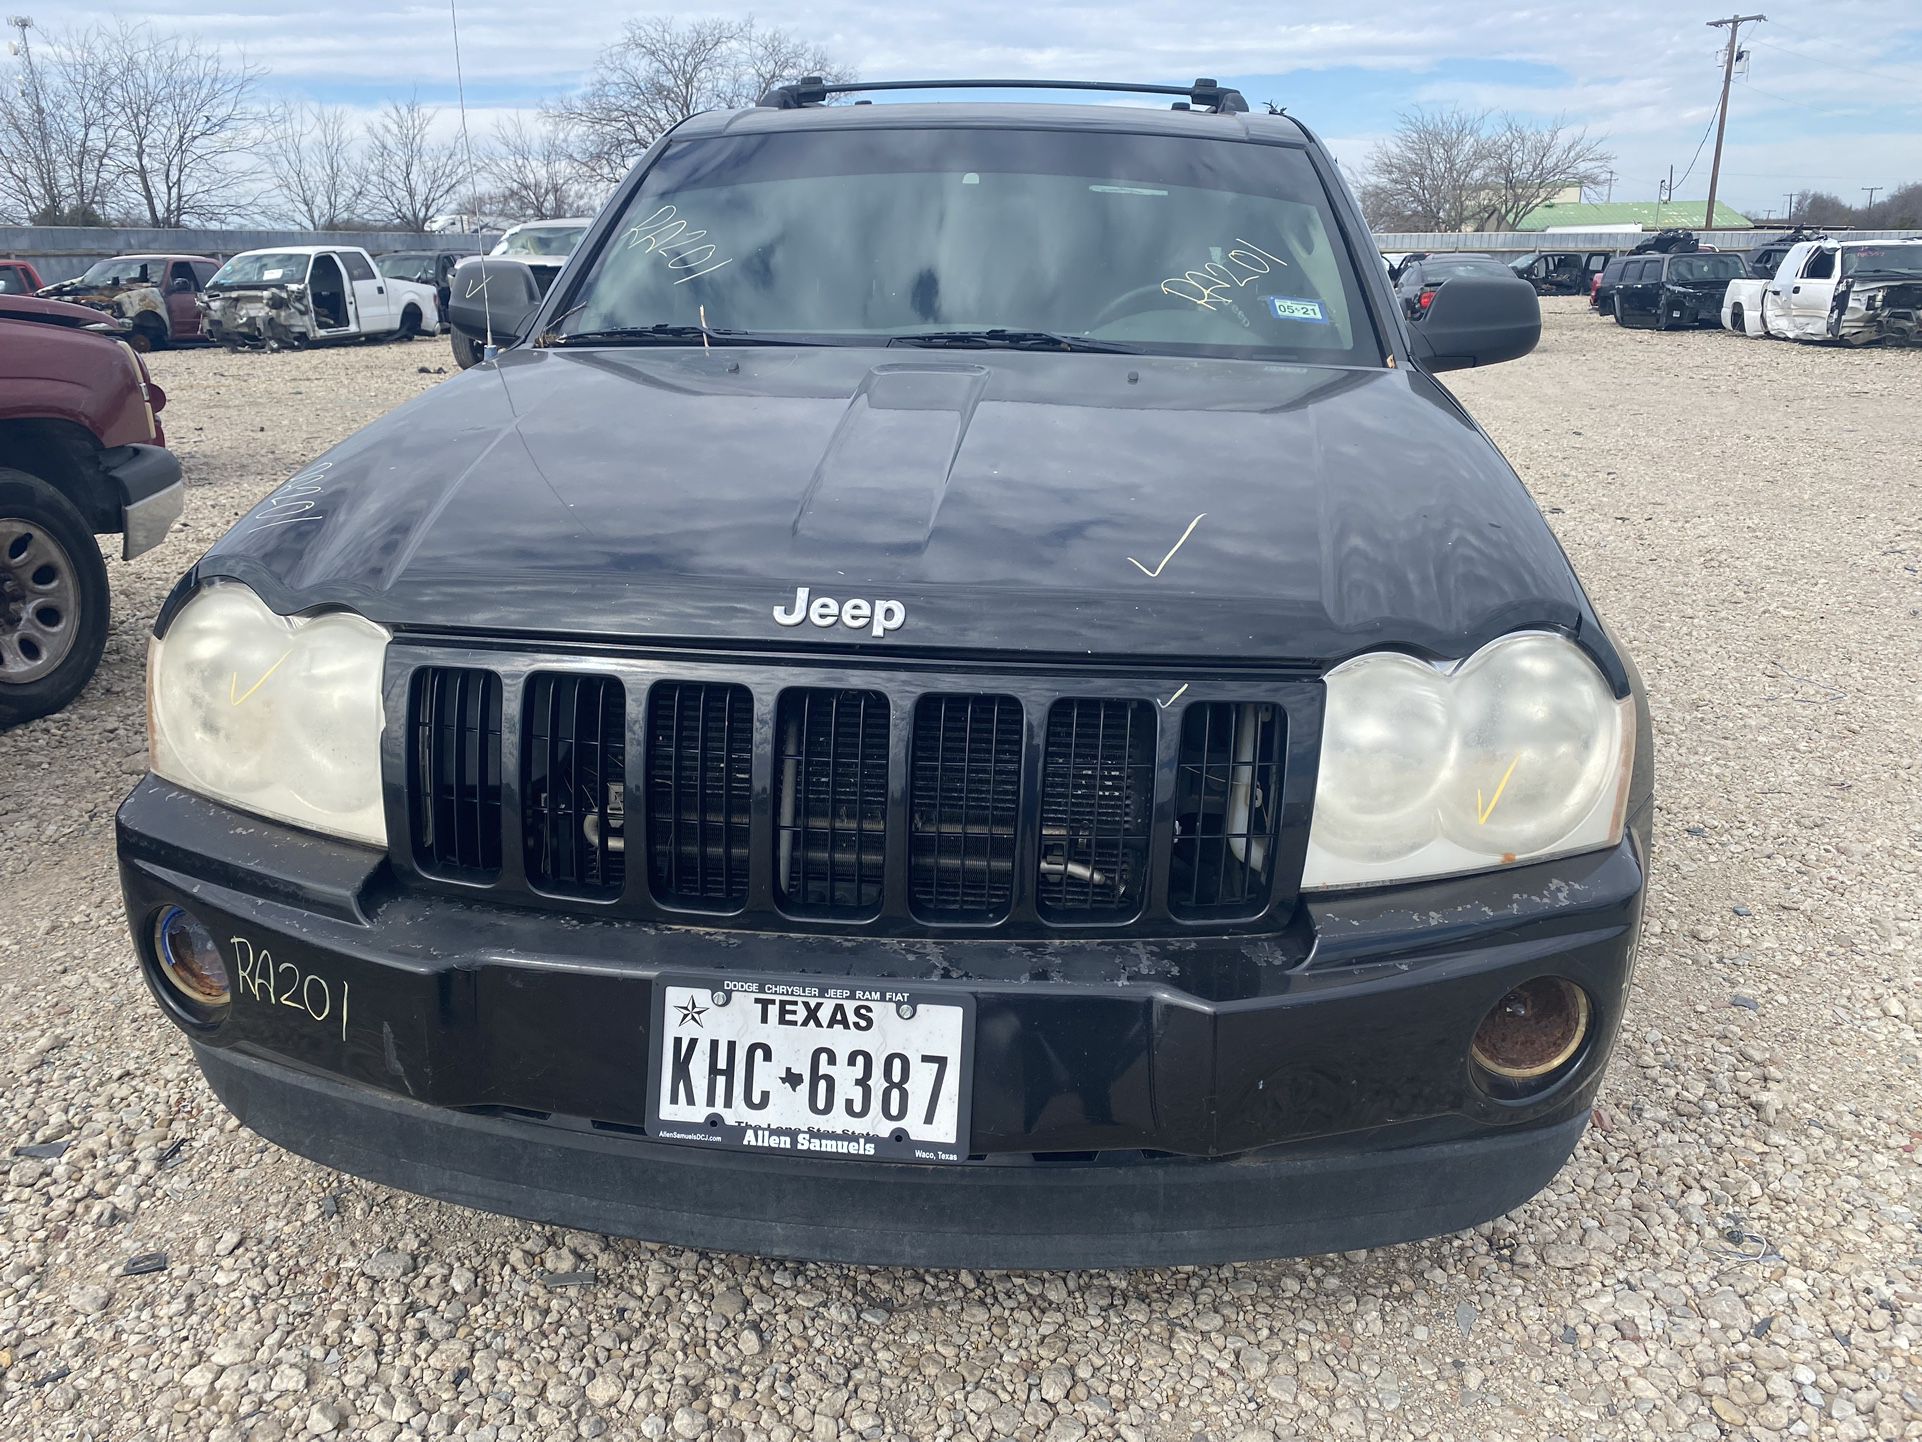 For parts only / 2005 JEEP grand Cherokee 3.7L v6 4x2 good transmission/ SOLO PARA PARTES